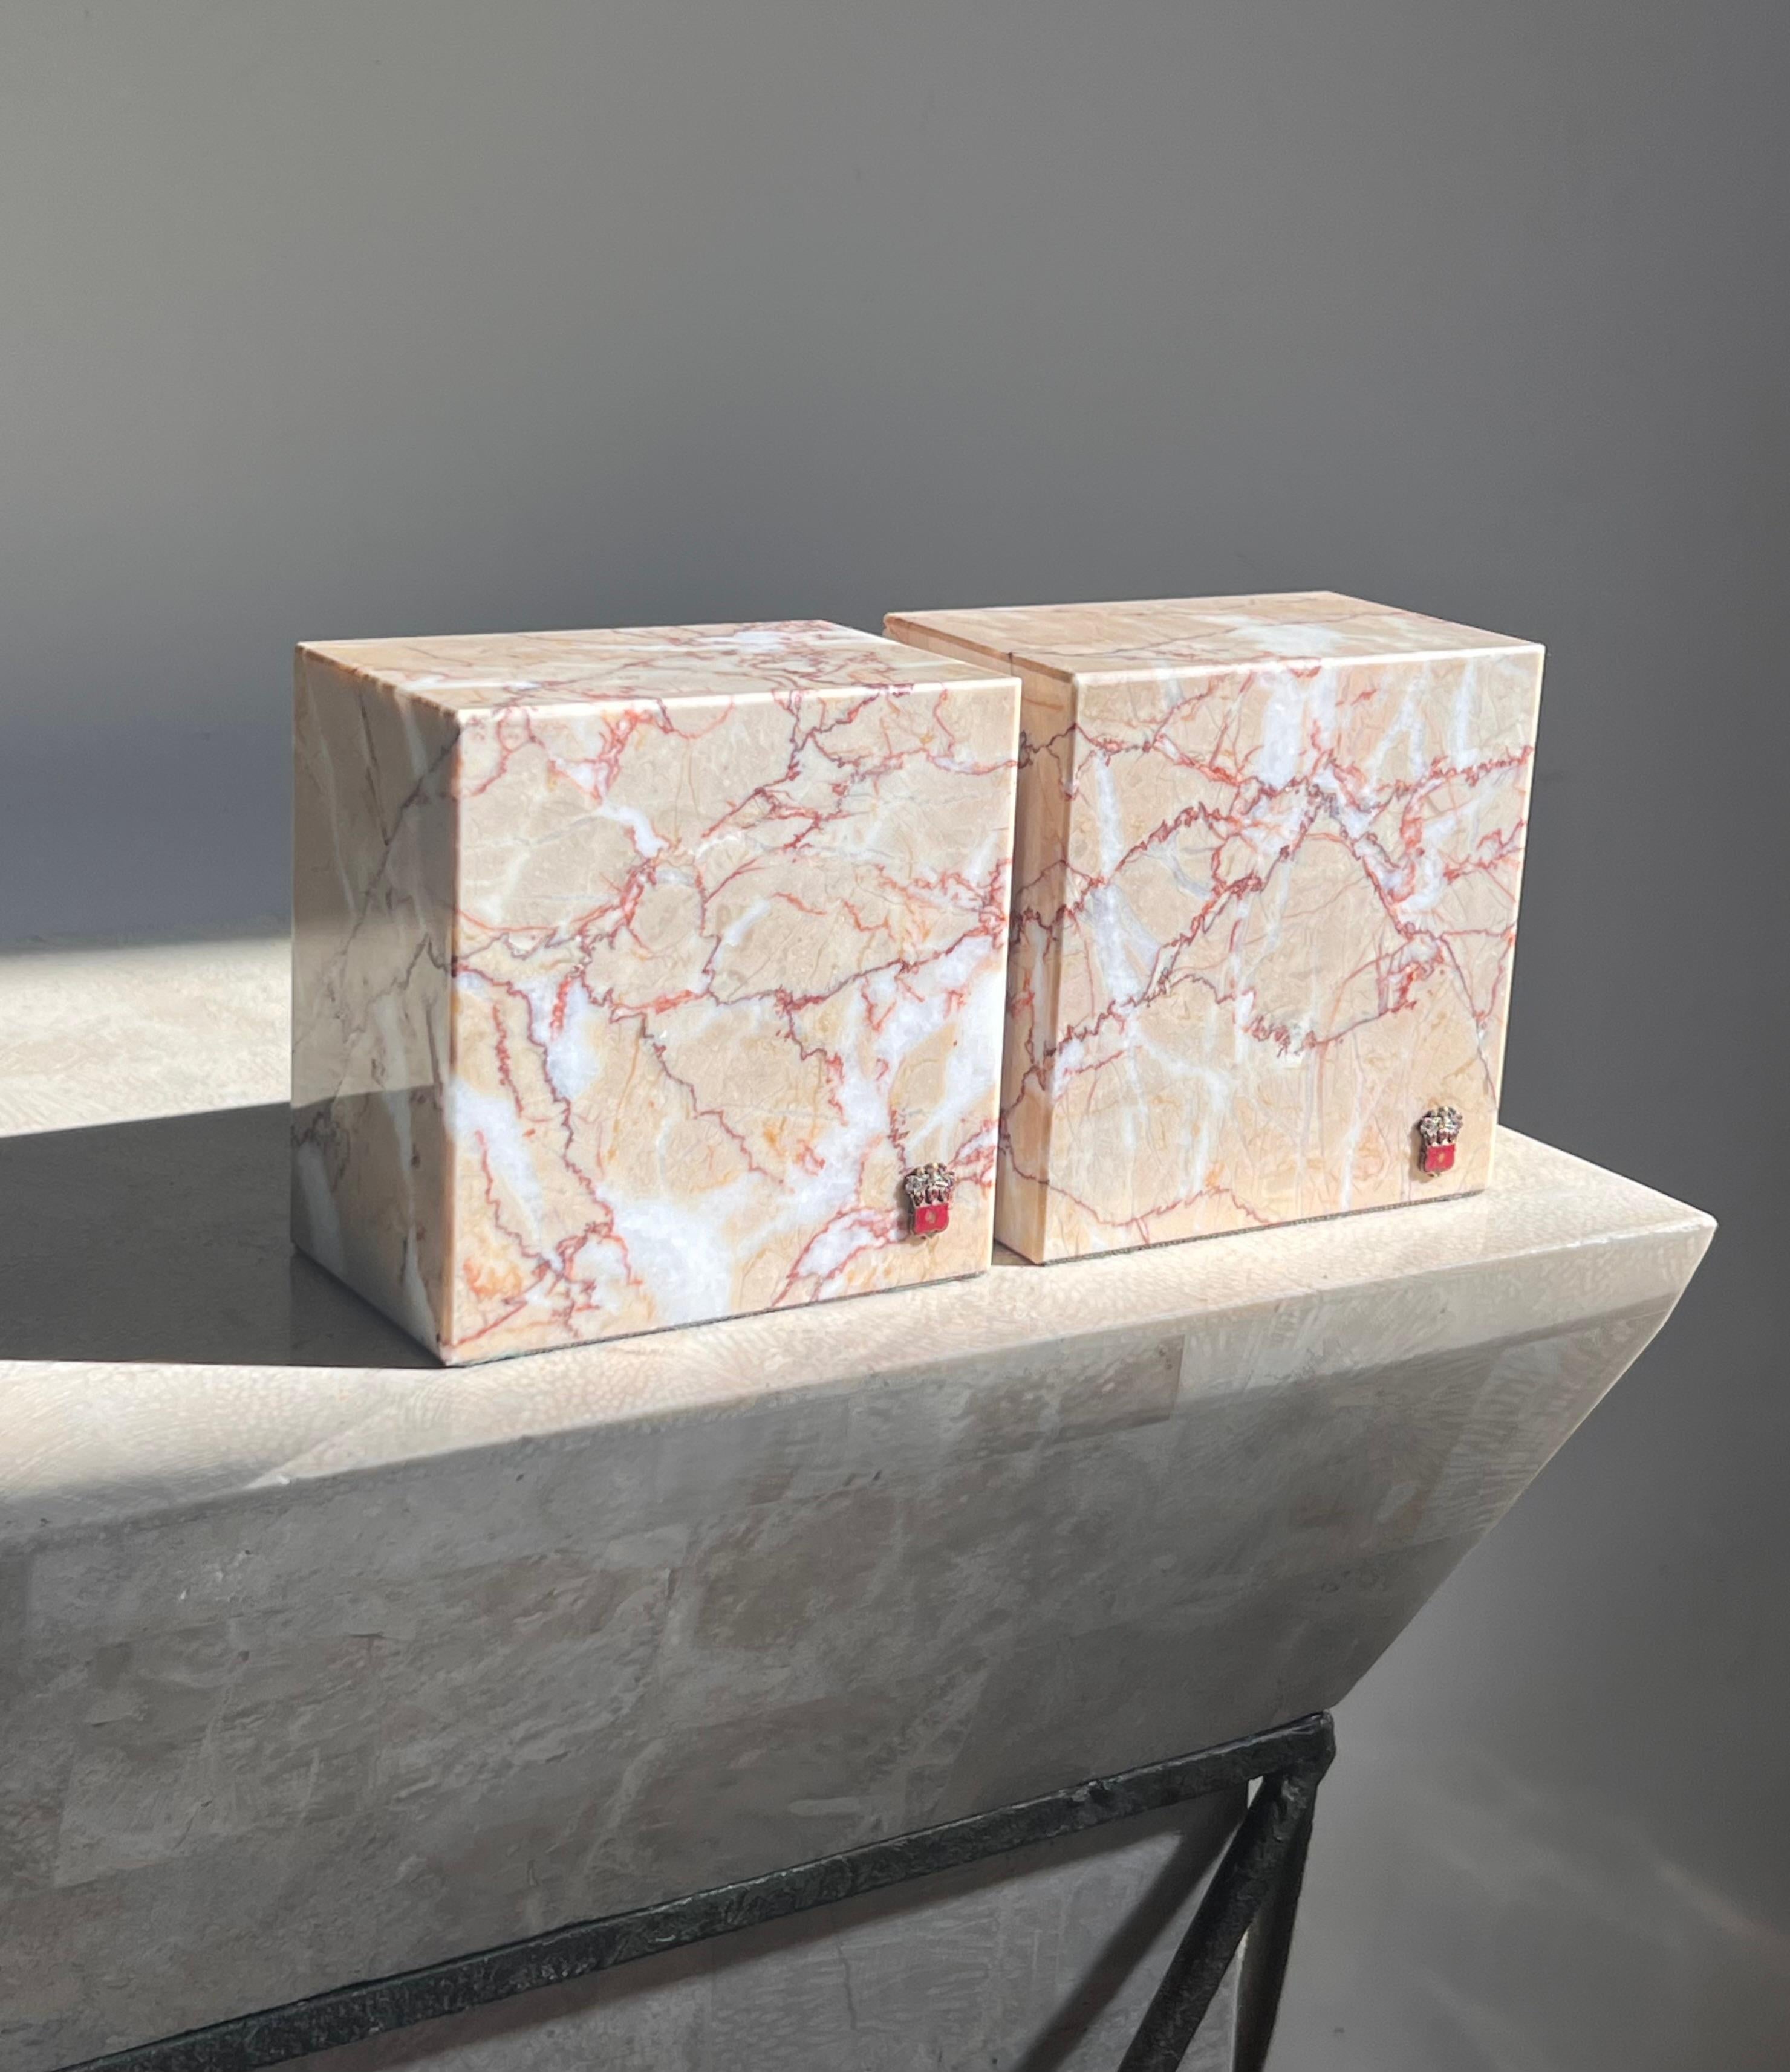 A pair of pink marble bookends by Vermont Marble Co, mid 20th century. Pale pink with burgundy and brilliant coral veining. Felted bottoms. Note the Vermont Marble Company insignia is intact on each bookend. Very heavy and in wonderful condition.